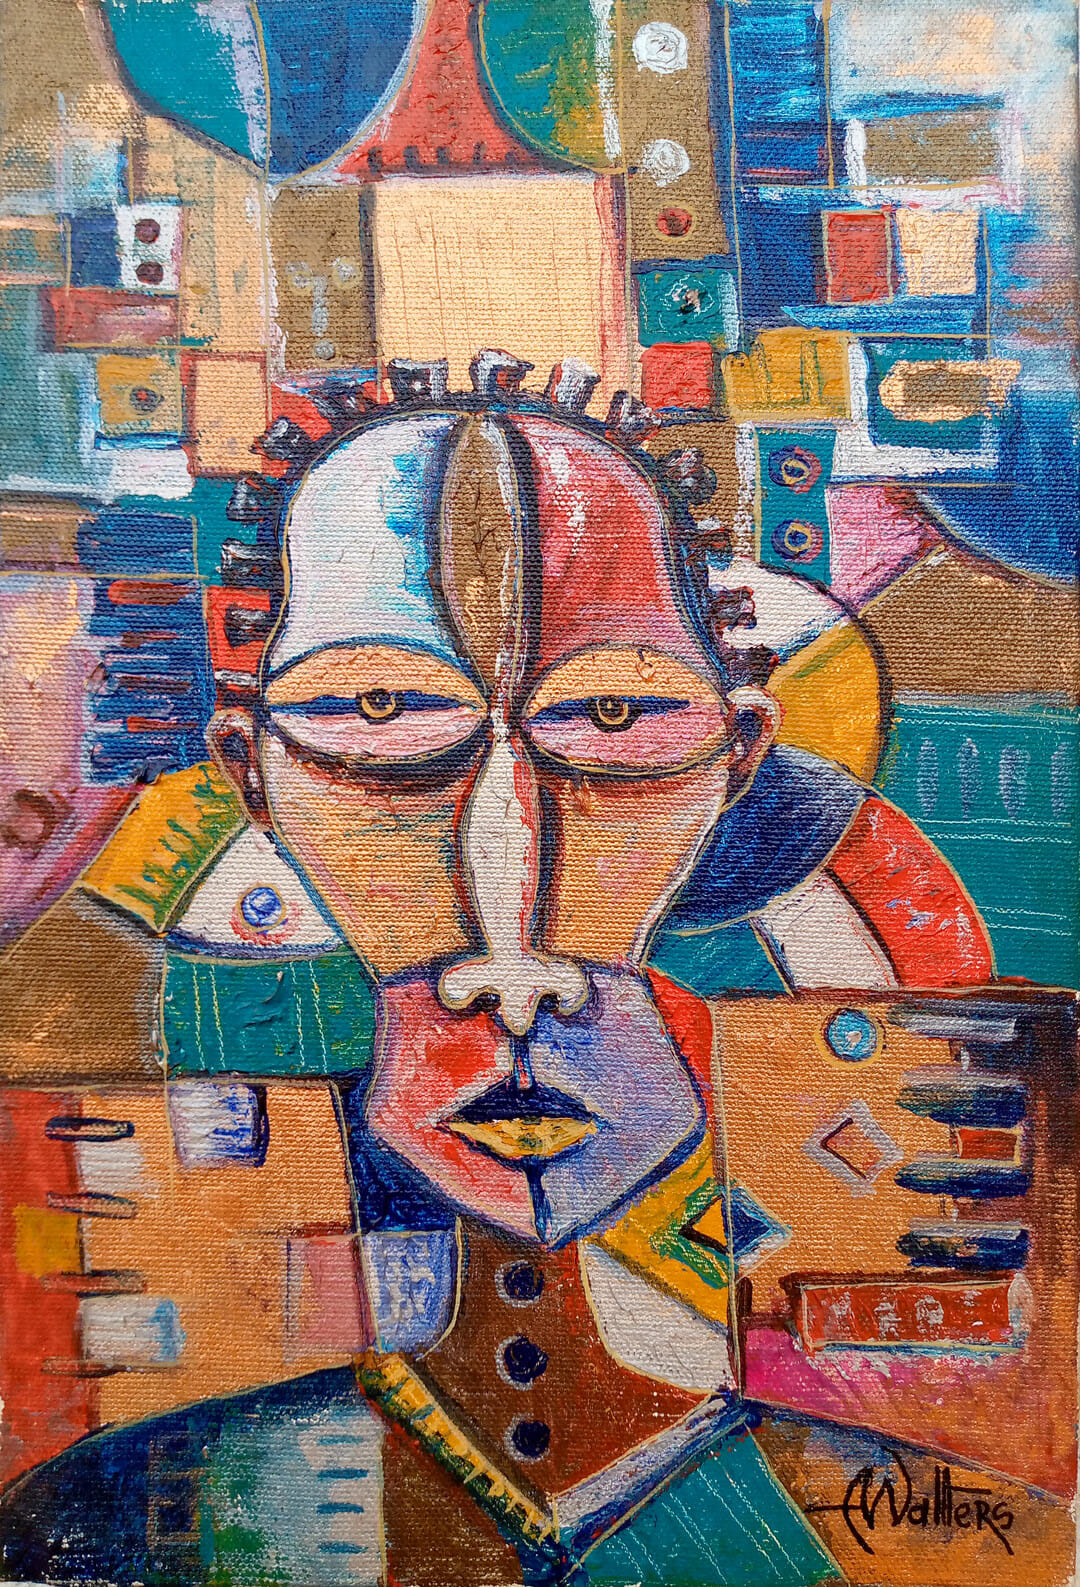 This acrylic painting on canvas is a self portrait of the artist Angu Walters.